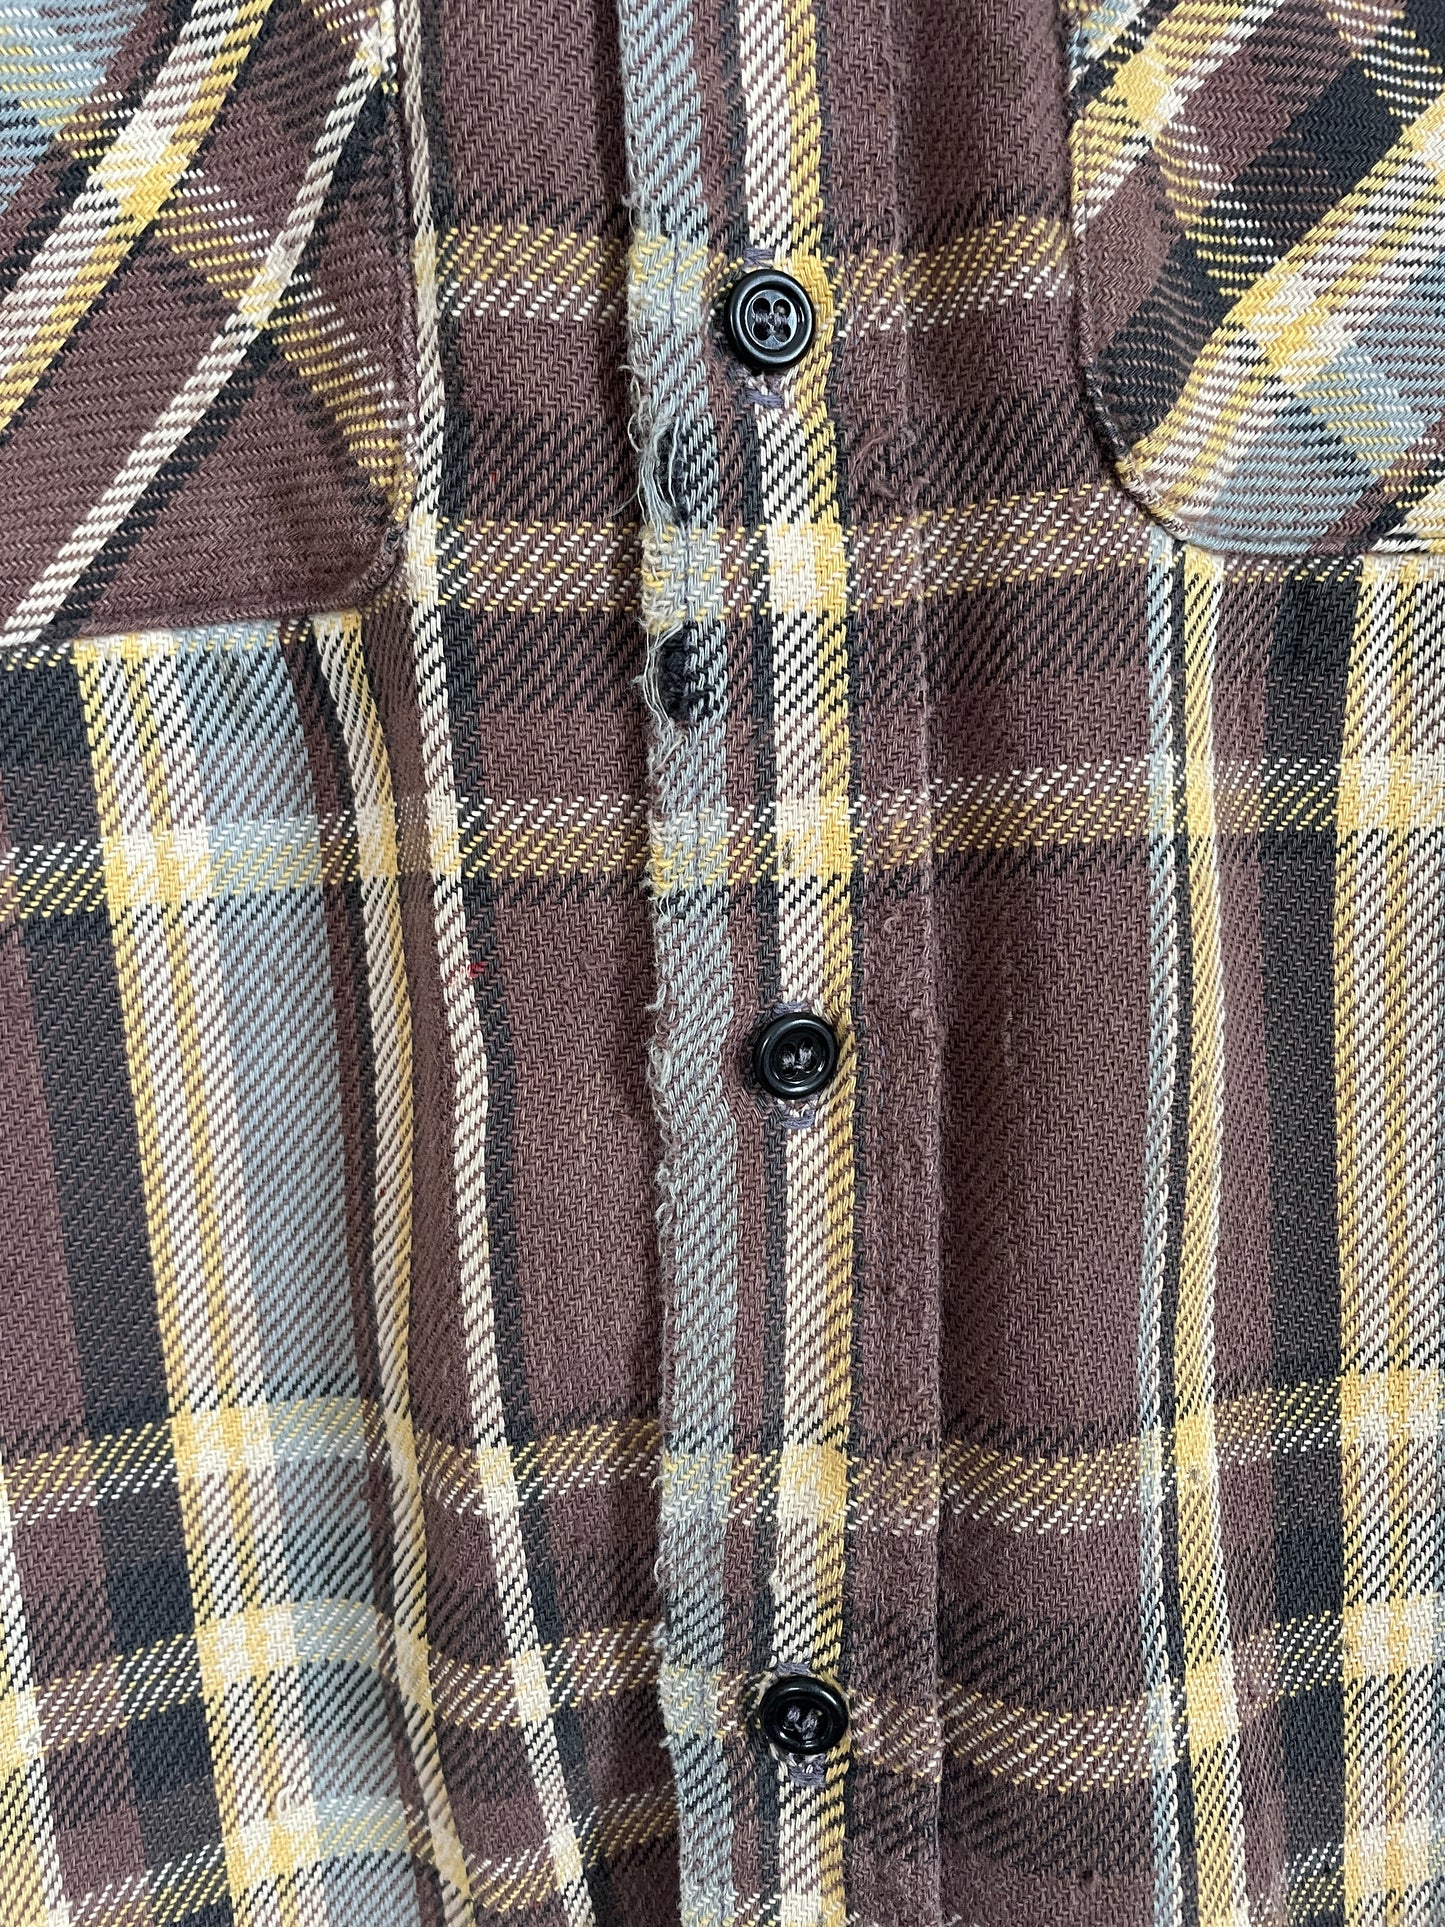 80s Five Brother Flannel